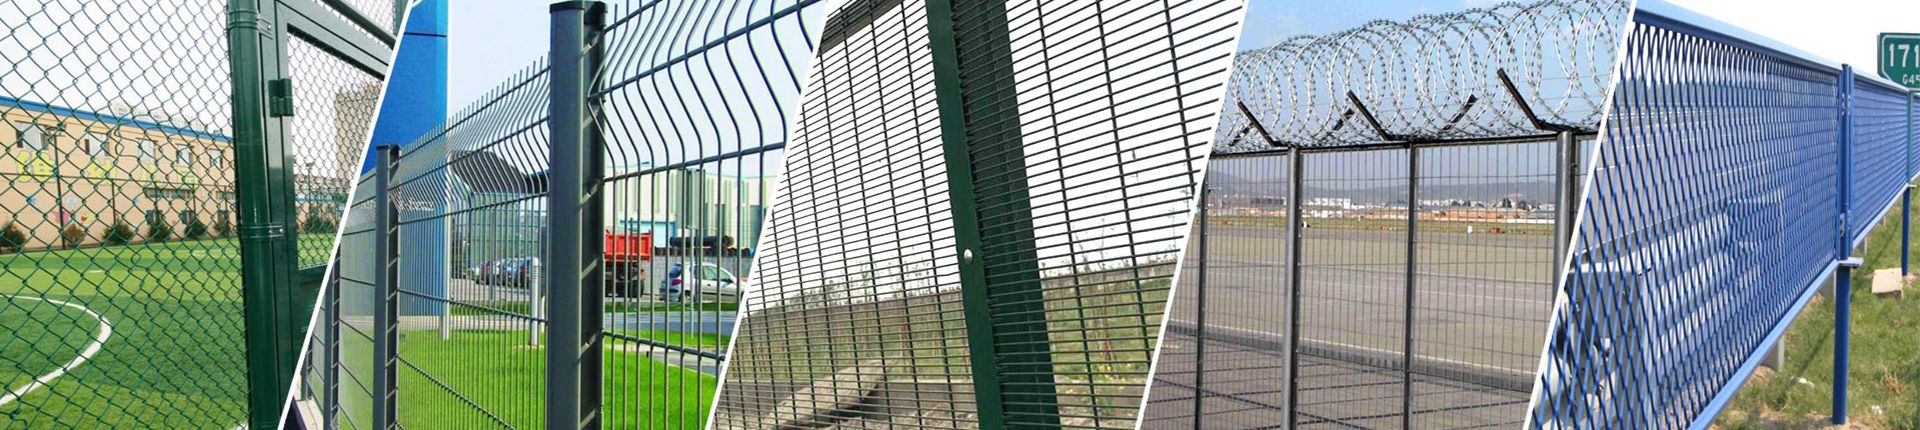 Wire mesh fence applications